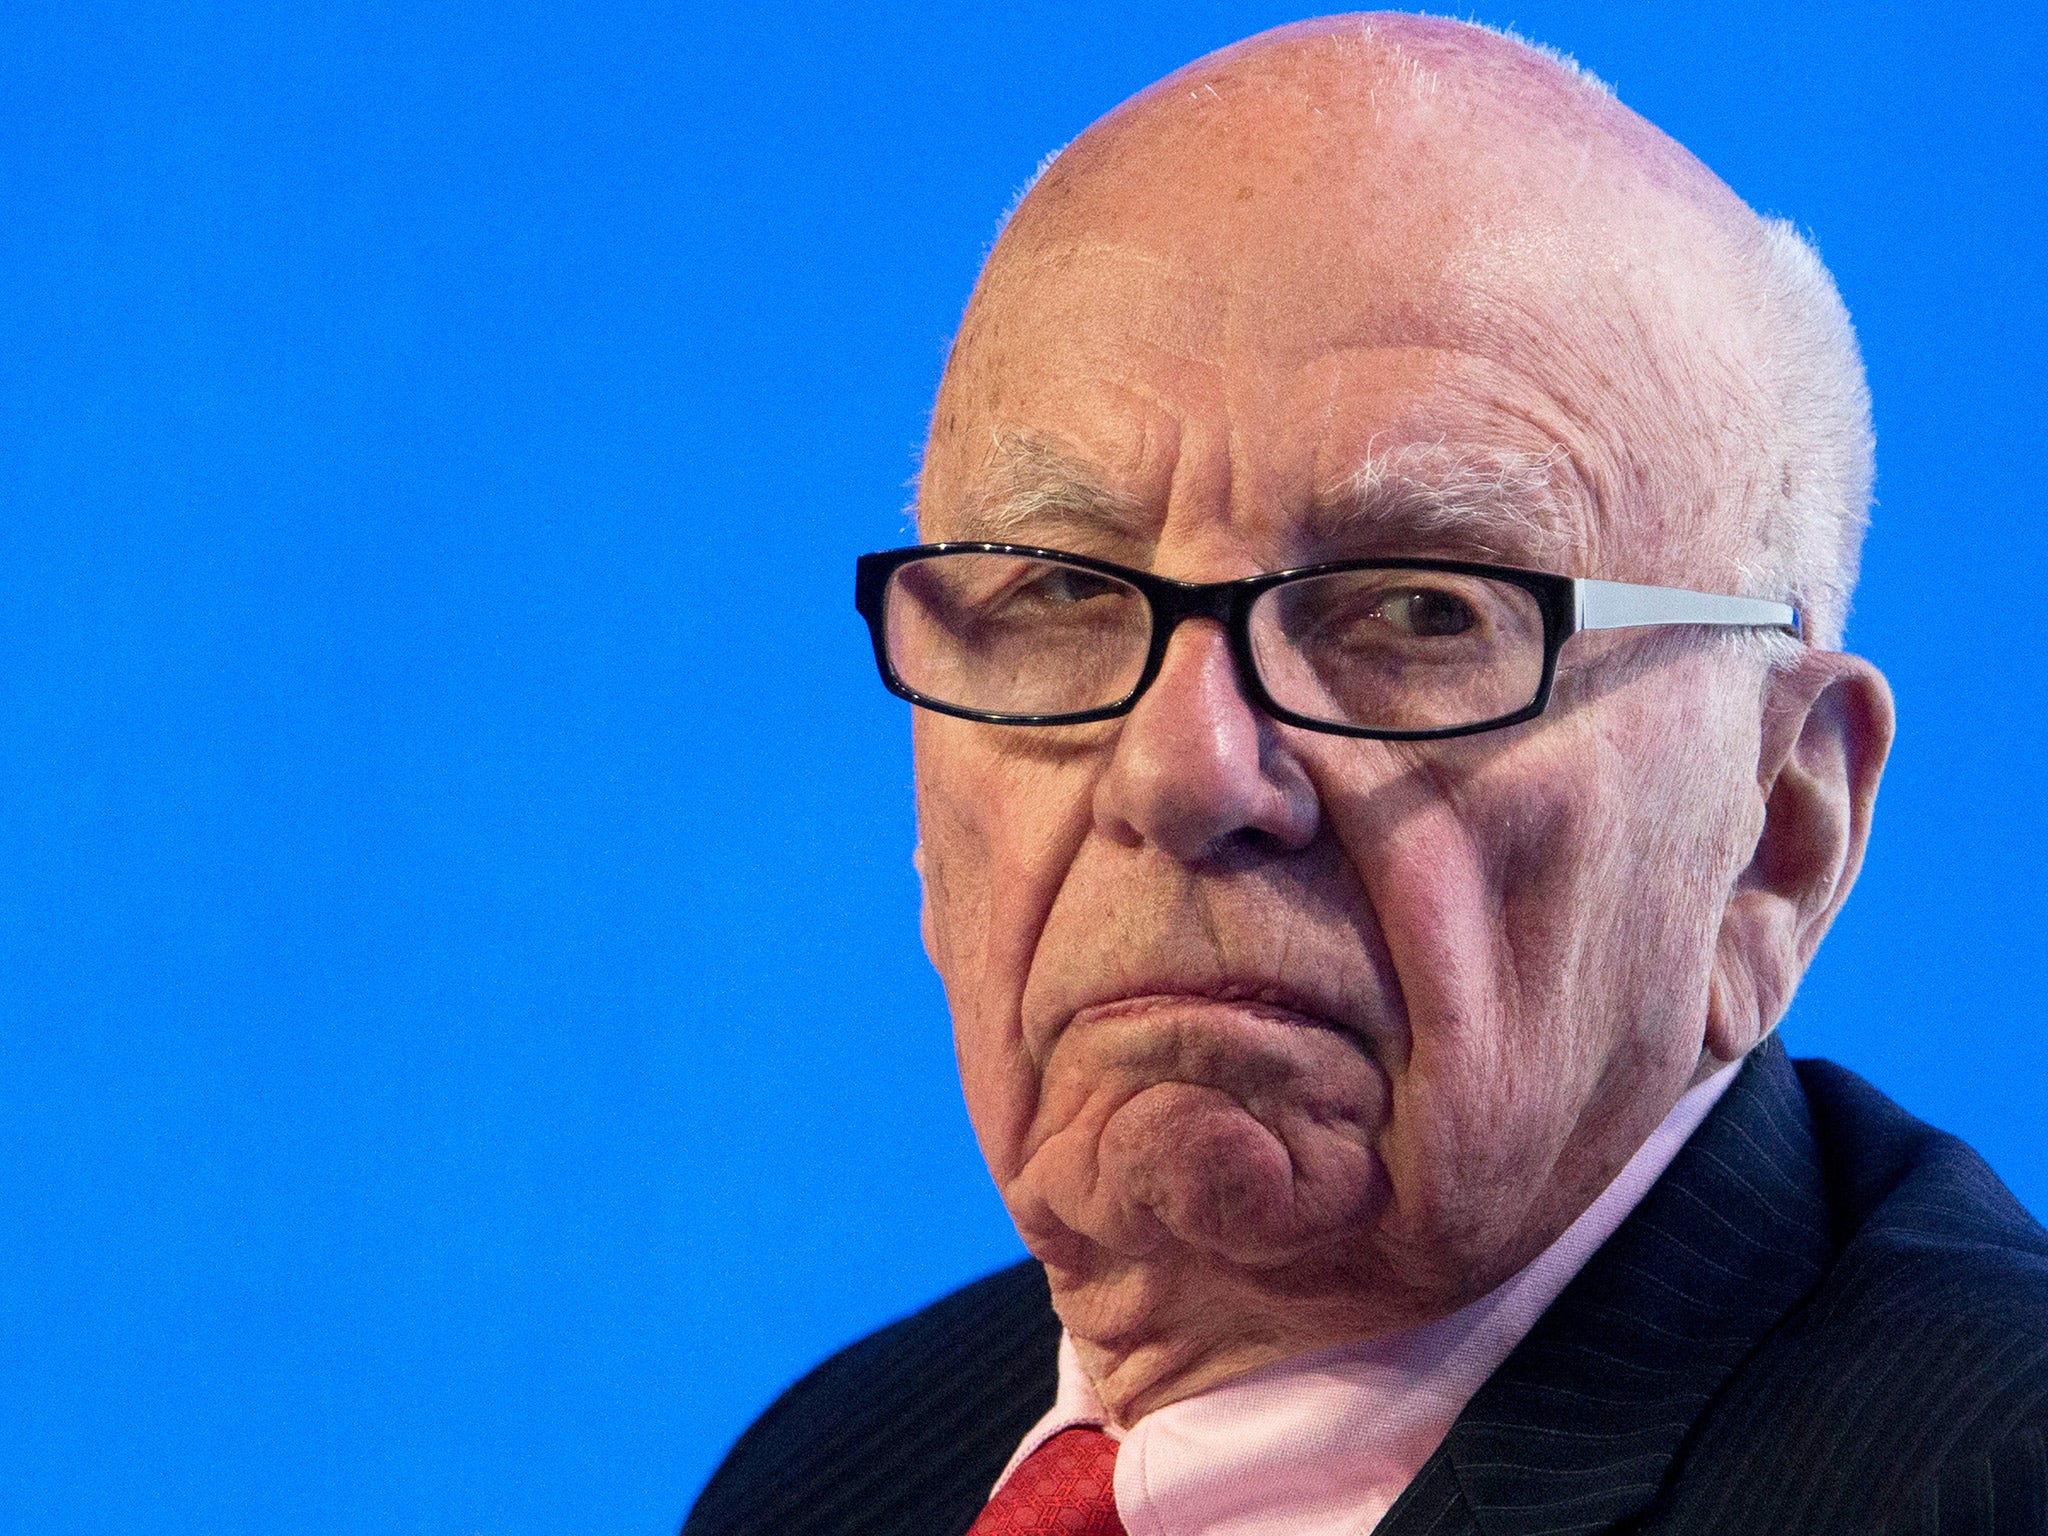 It is not the first time that a Rupert Murdoch tweet has caused controversy